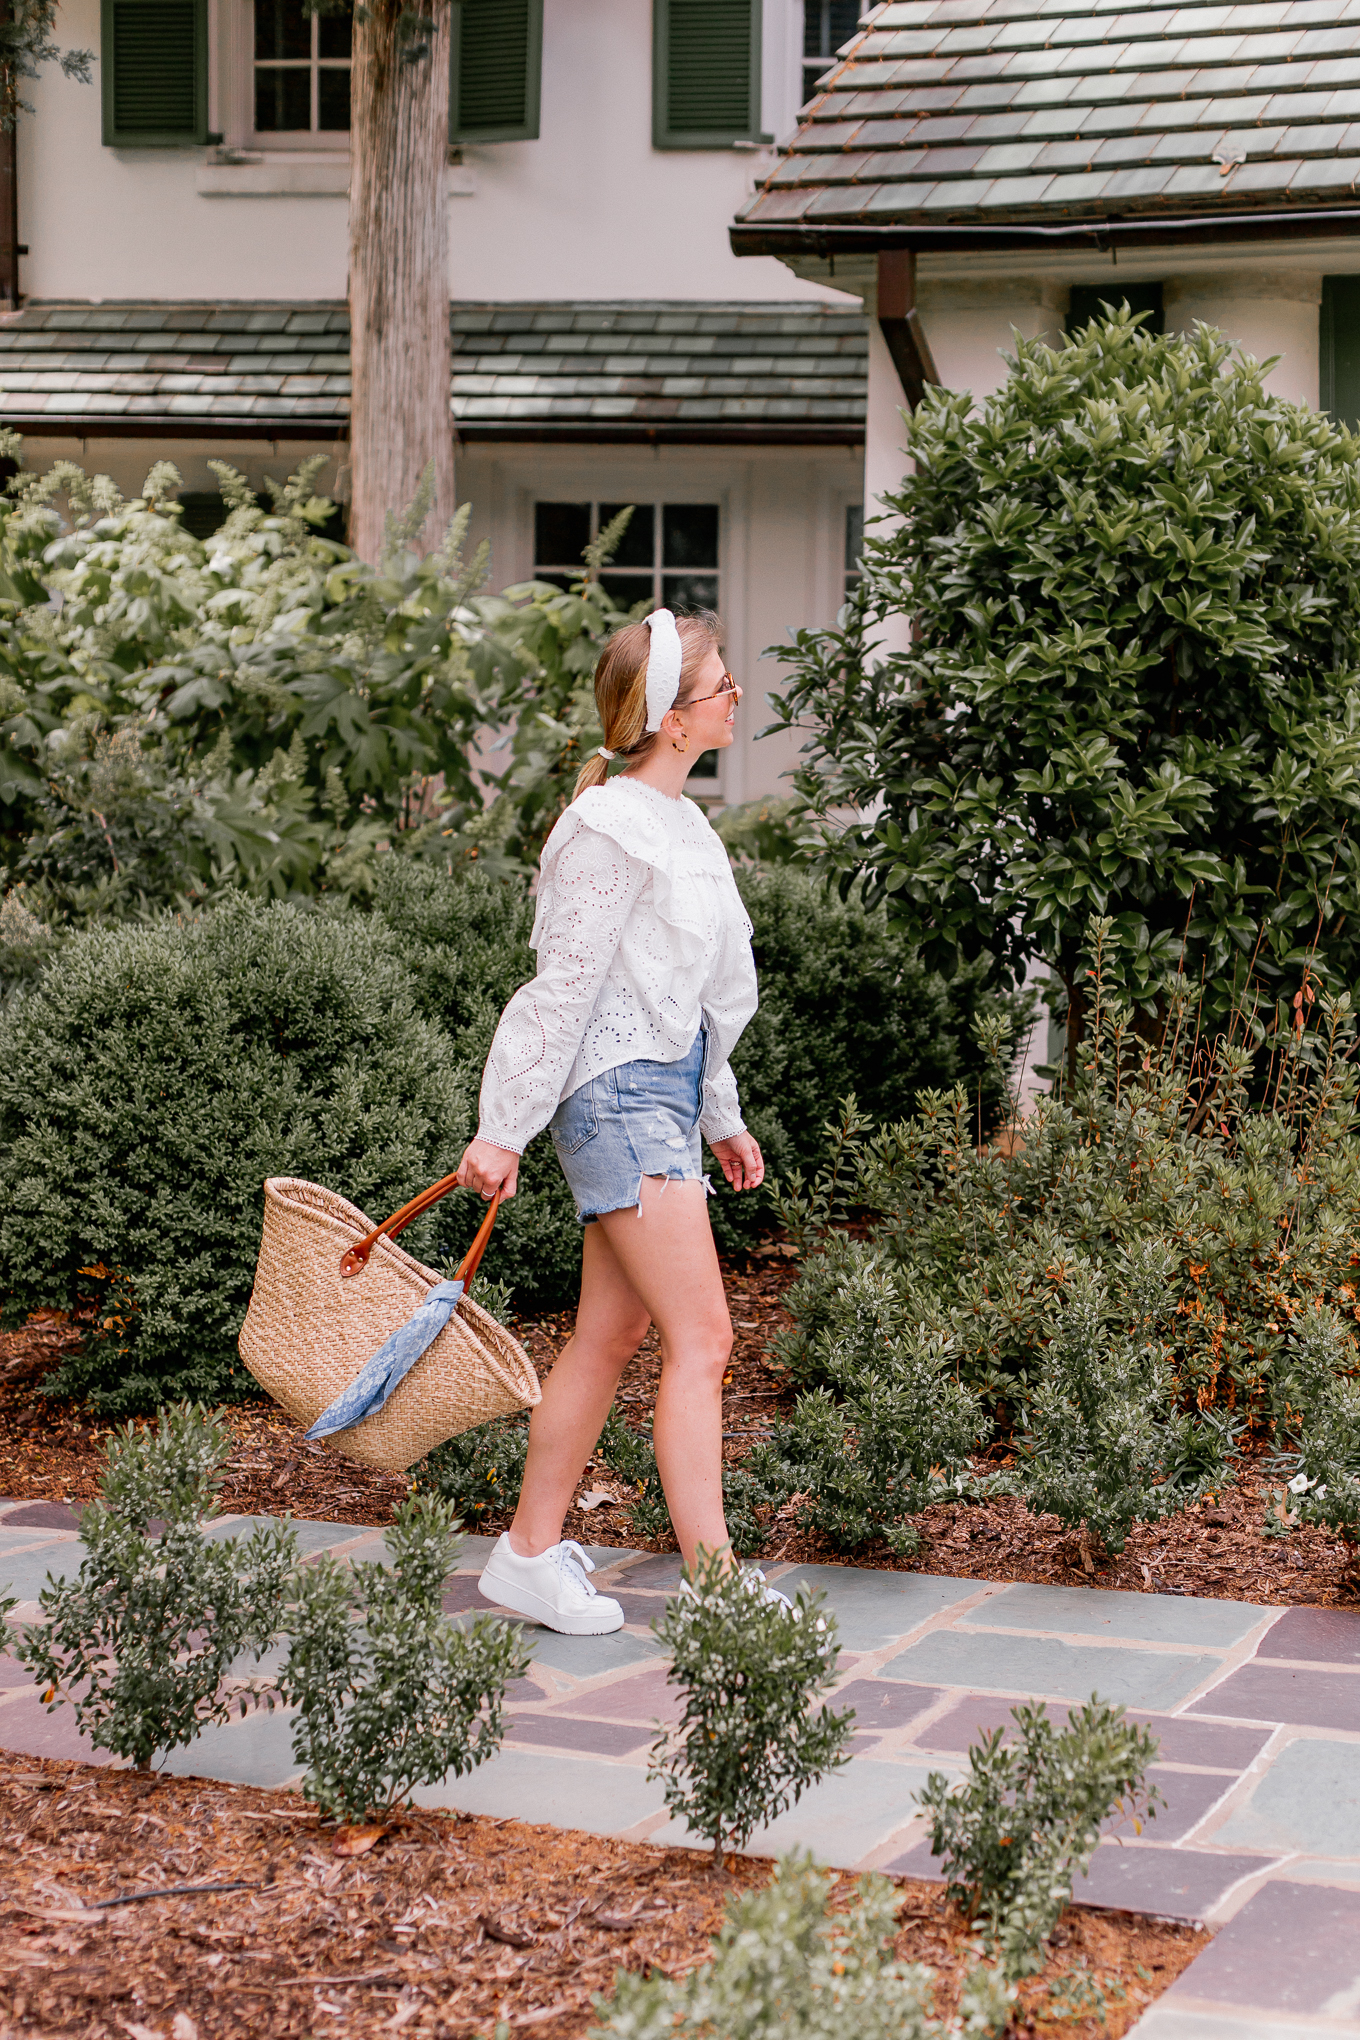 Recent Looks May 2020 | Casual Summer Style - Eyelet Top, Denim Cutoff Shorts | Louella Reese